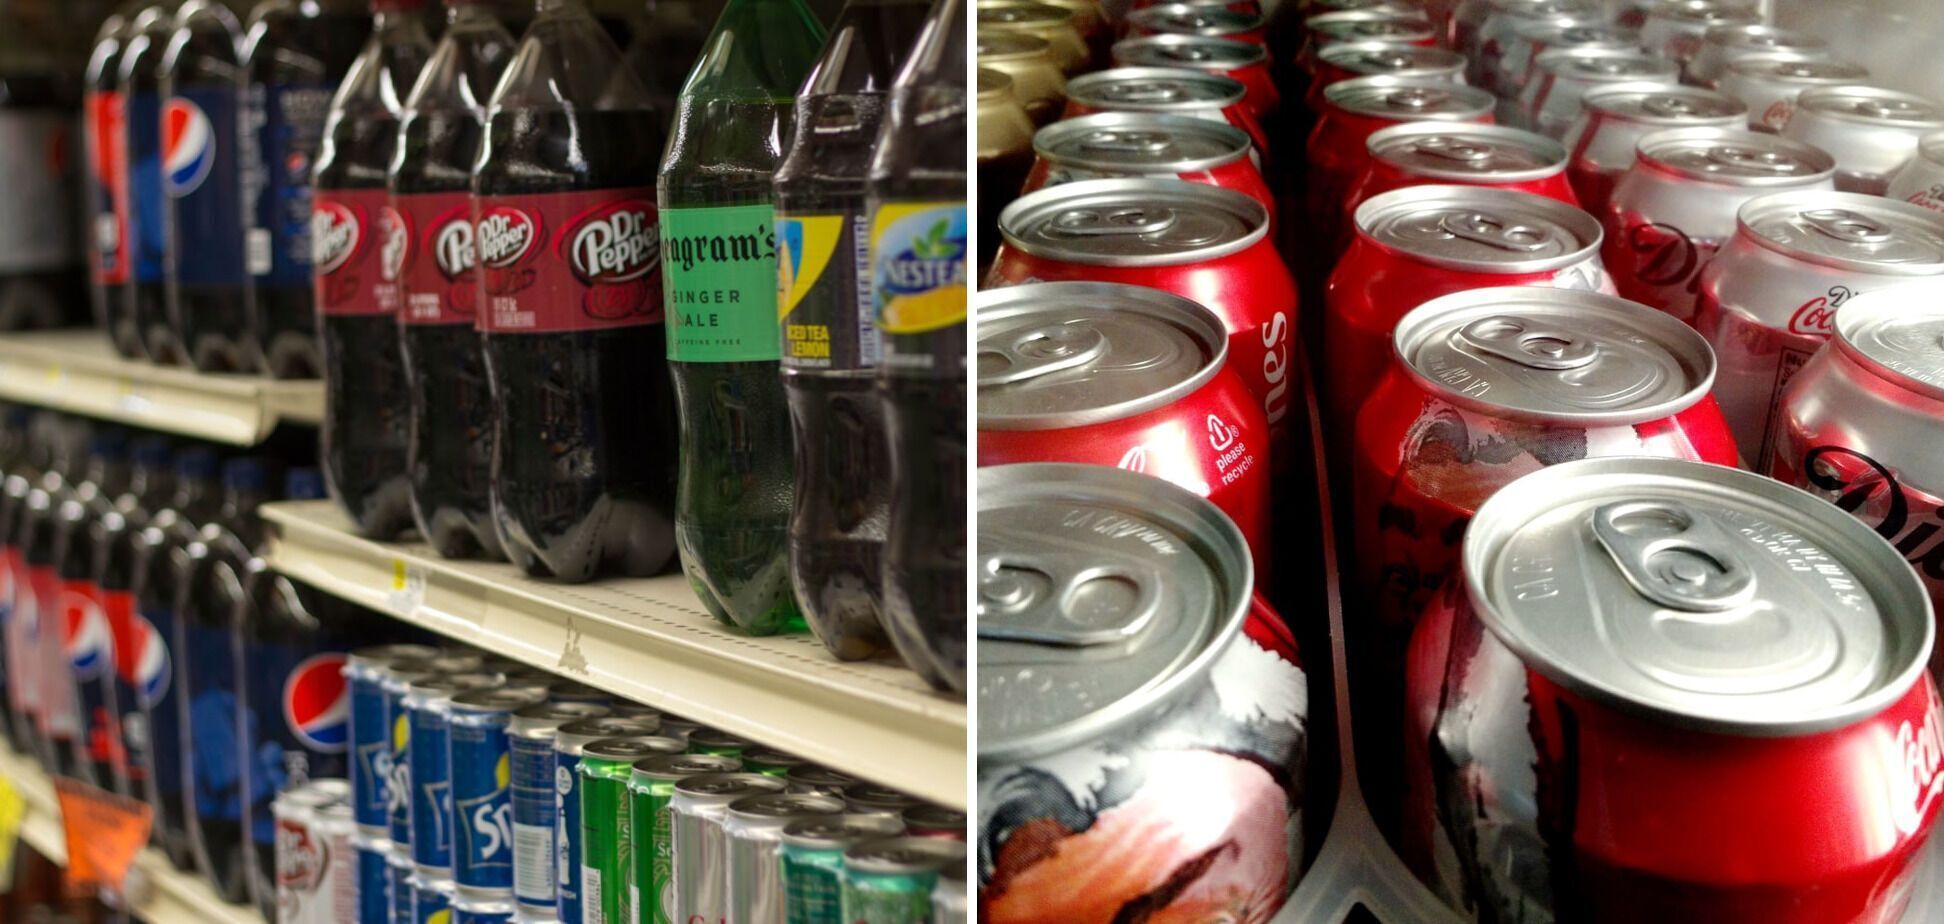 Sugary drinks may be taxed in Ukraine